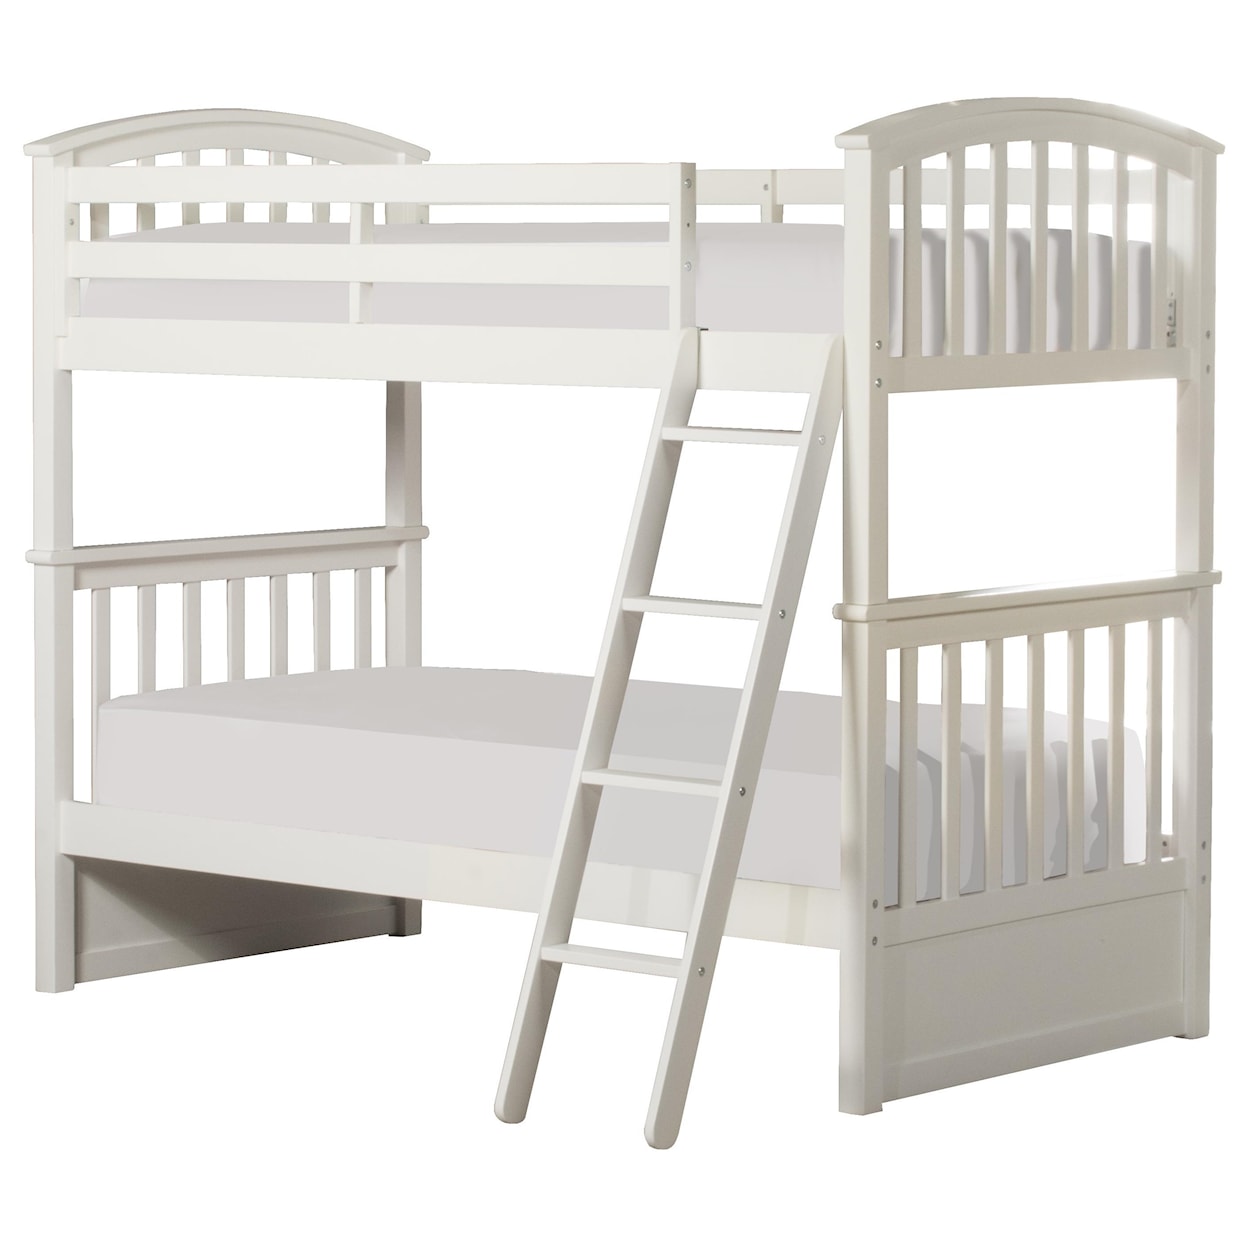 Hillsdale Schoolhouse Twin Bunk Bed w/ Trundle